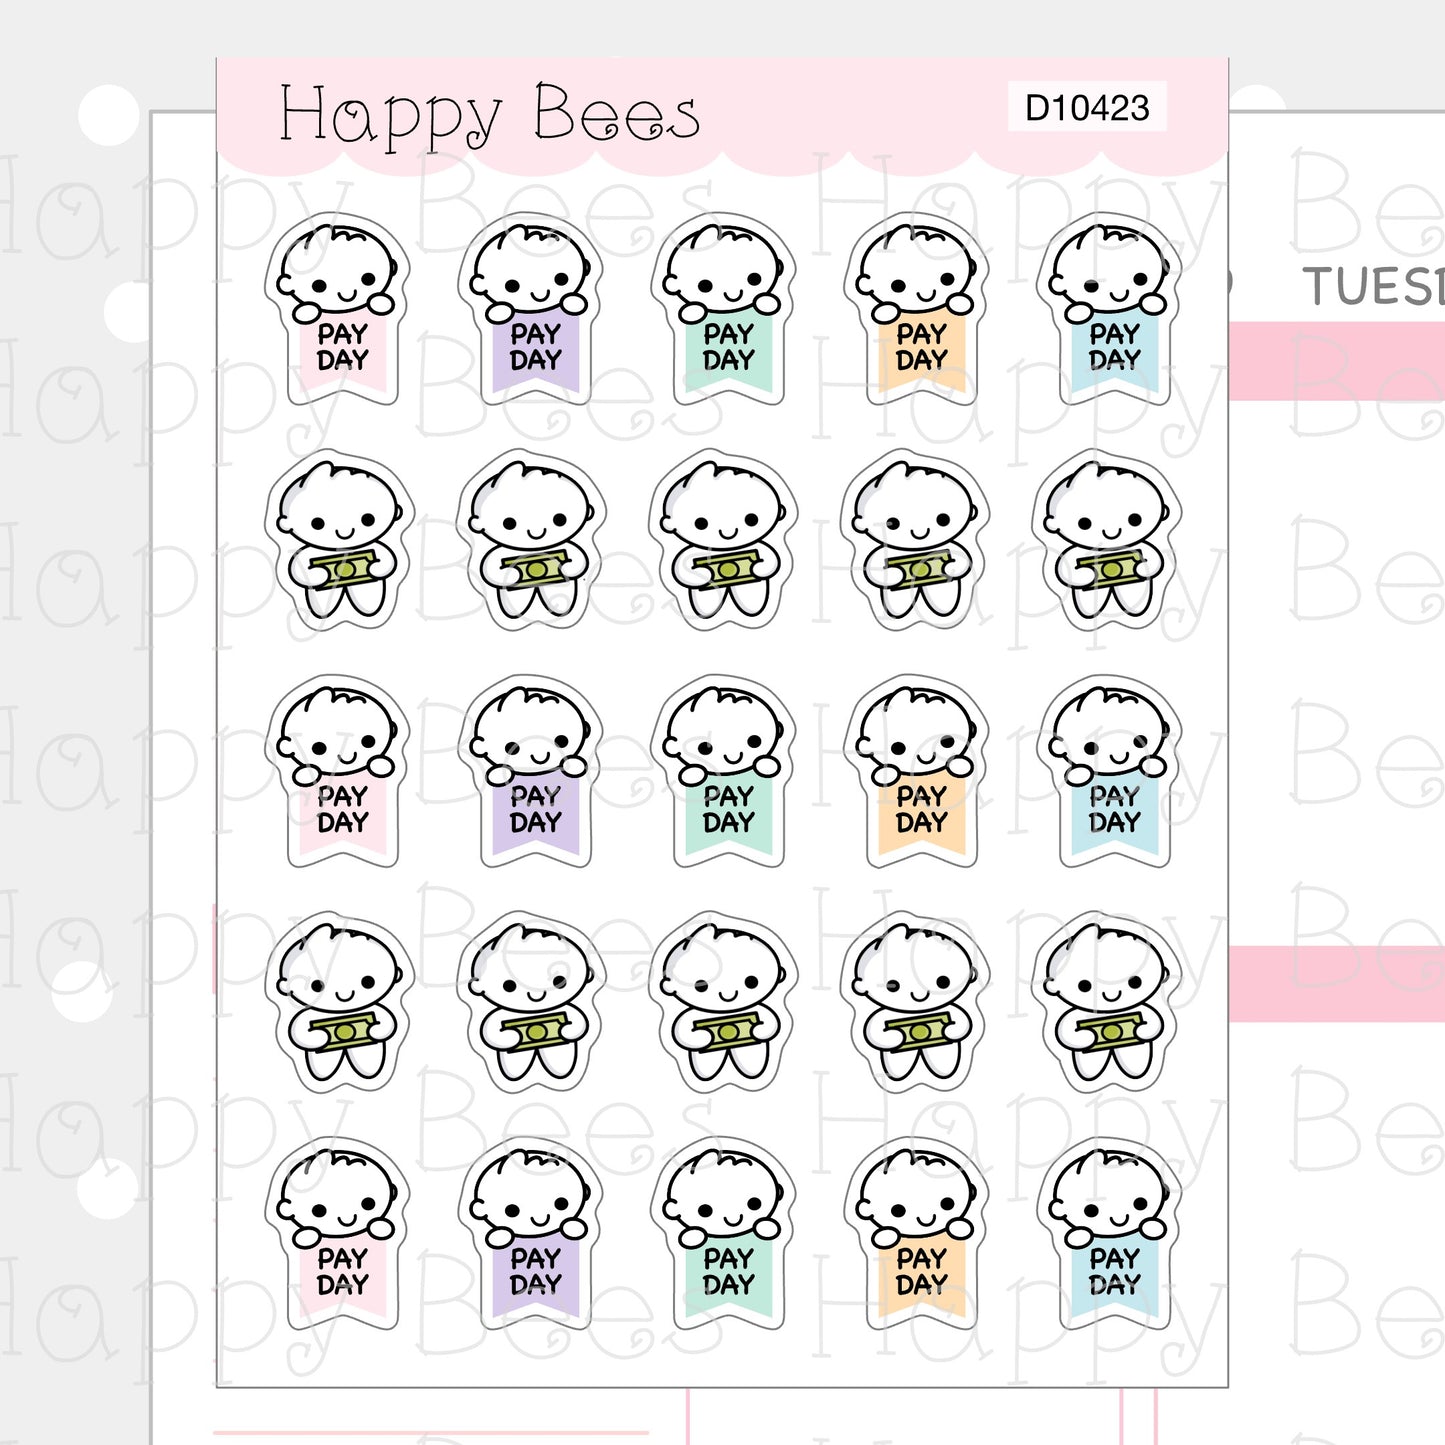 Payday Doodles Vol. 2 - Cute Finance Money Planner Stickers D10423